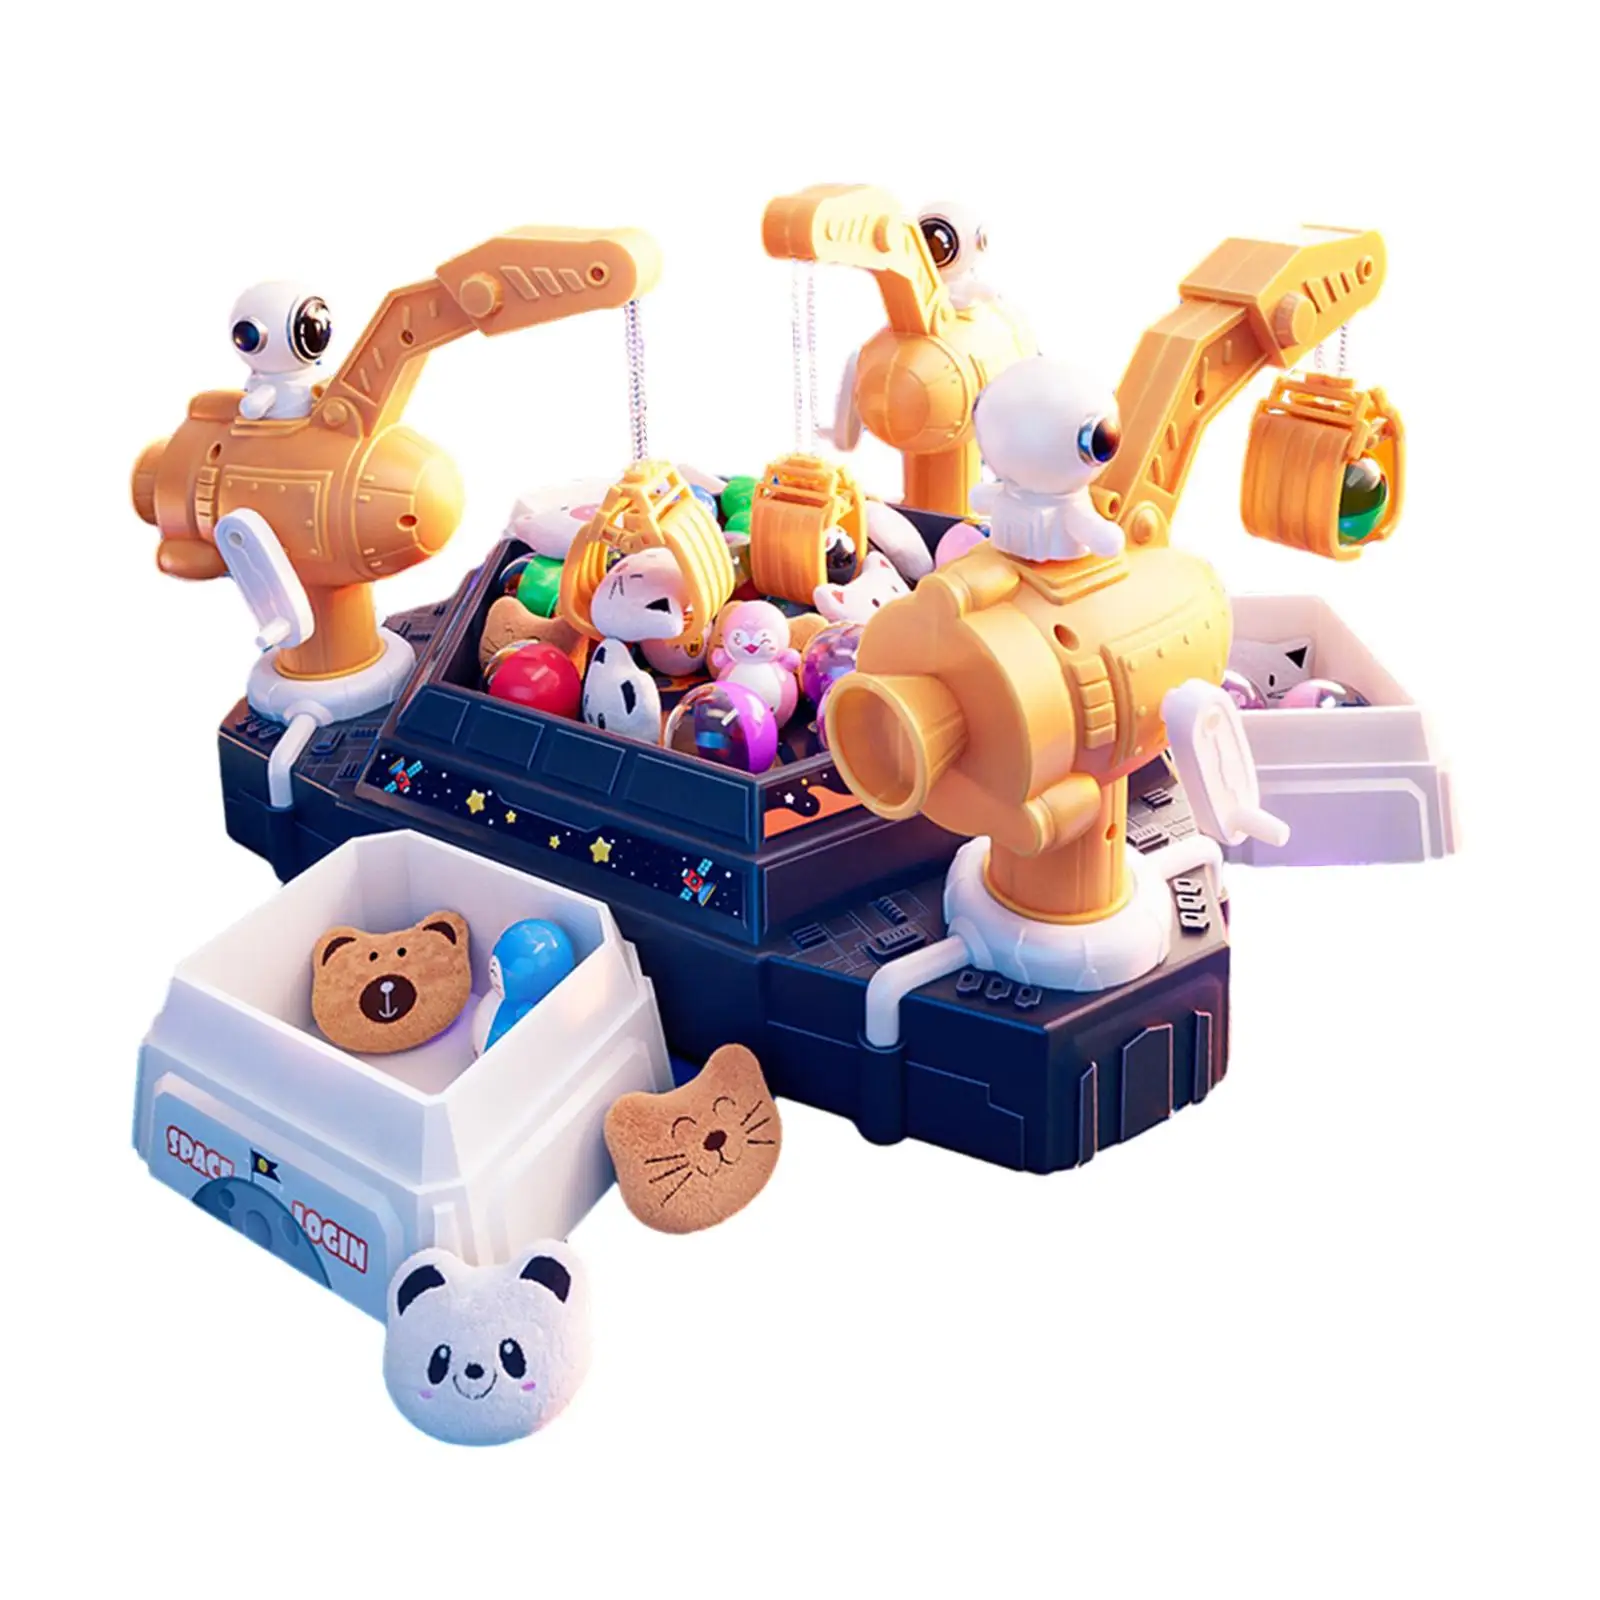 Electronic Small Toys with 4 Mini Plush Dolls Capsules Mini Claw Machine Candy Dispenser Toys for Aged 3-12 Home Kids Girls Boys